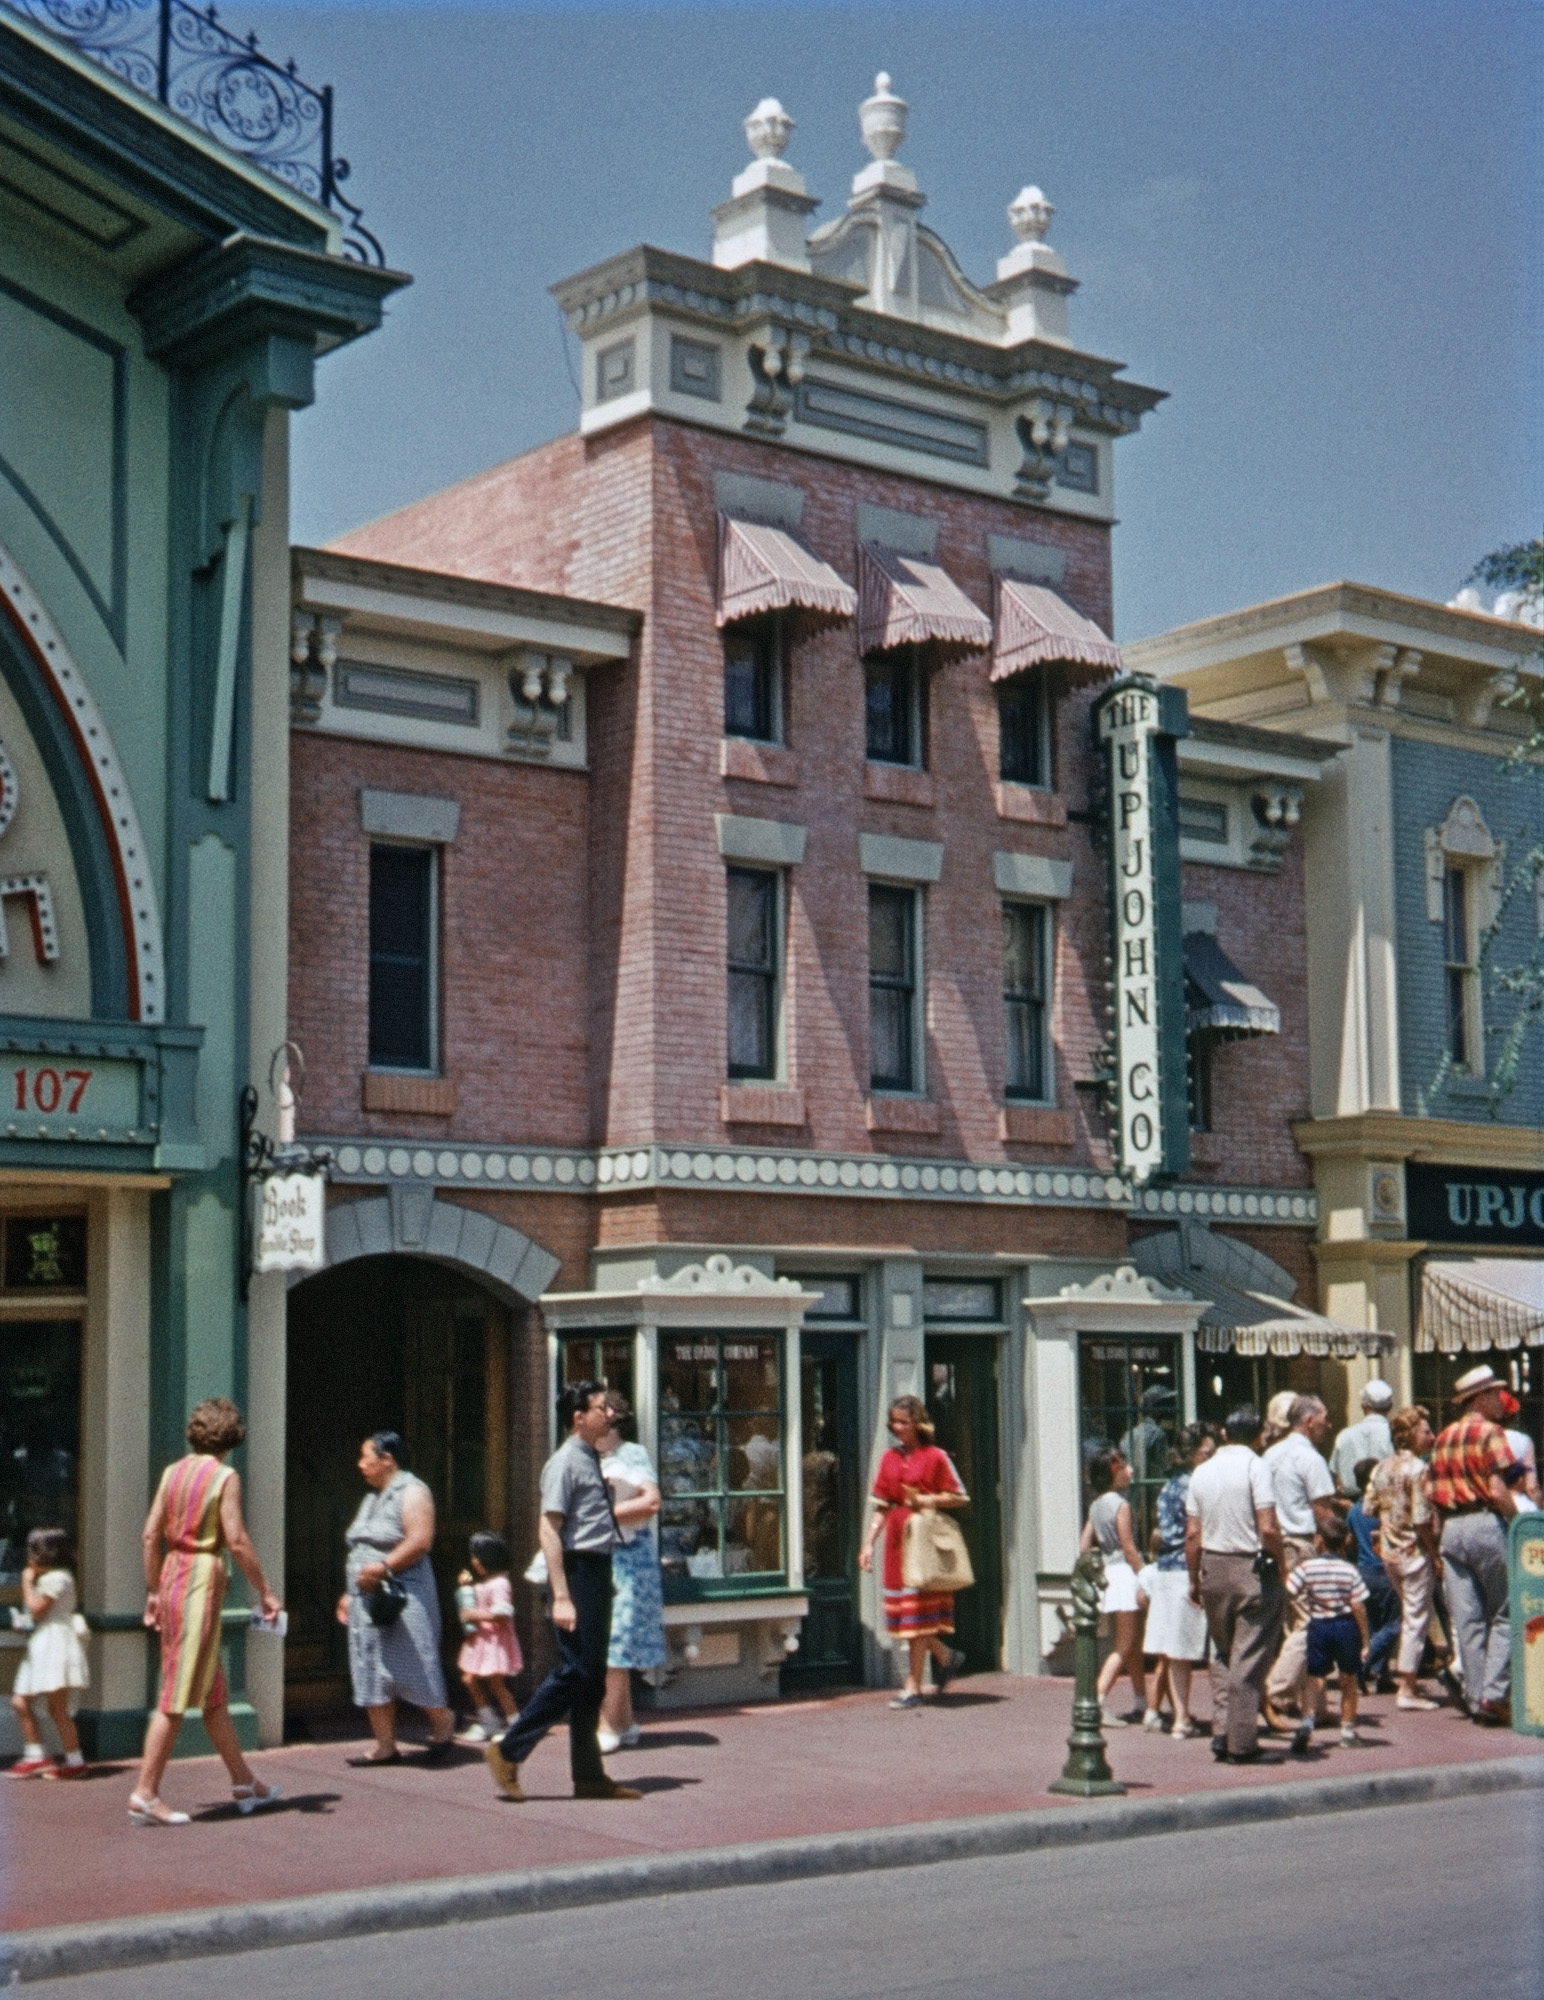 The other day, Shorpy posted this photo of Saratoga Springs, which Dave described as "looking more than a little like one of those idealized Disney 'Main Streets'." One perspicacious commenter pointed out that Disney's relationship to the historic period portrayed in his Main Street (approx. 50 years past), would be like ours to the 1950s and 60s. So here you have it: Main Street in Disneyland, August 1963, roughly at the mid-point between the then-then and now. That's my brother in the gray shirt and Hush Puppies caught in mid-stride. I was just turning 17 when I shot this on Montgomery Ward's house-brand 35mm color slide film. View full size.